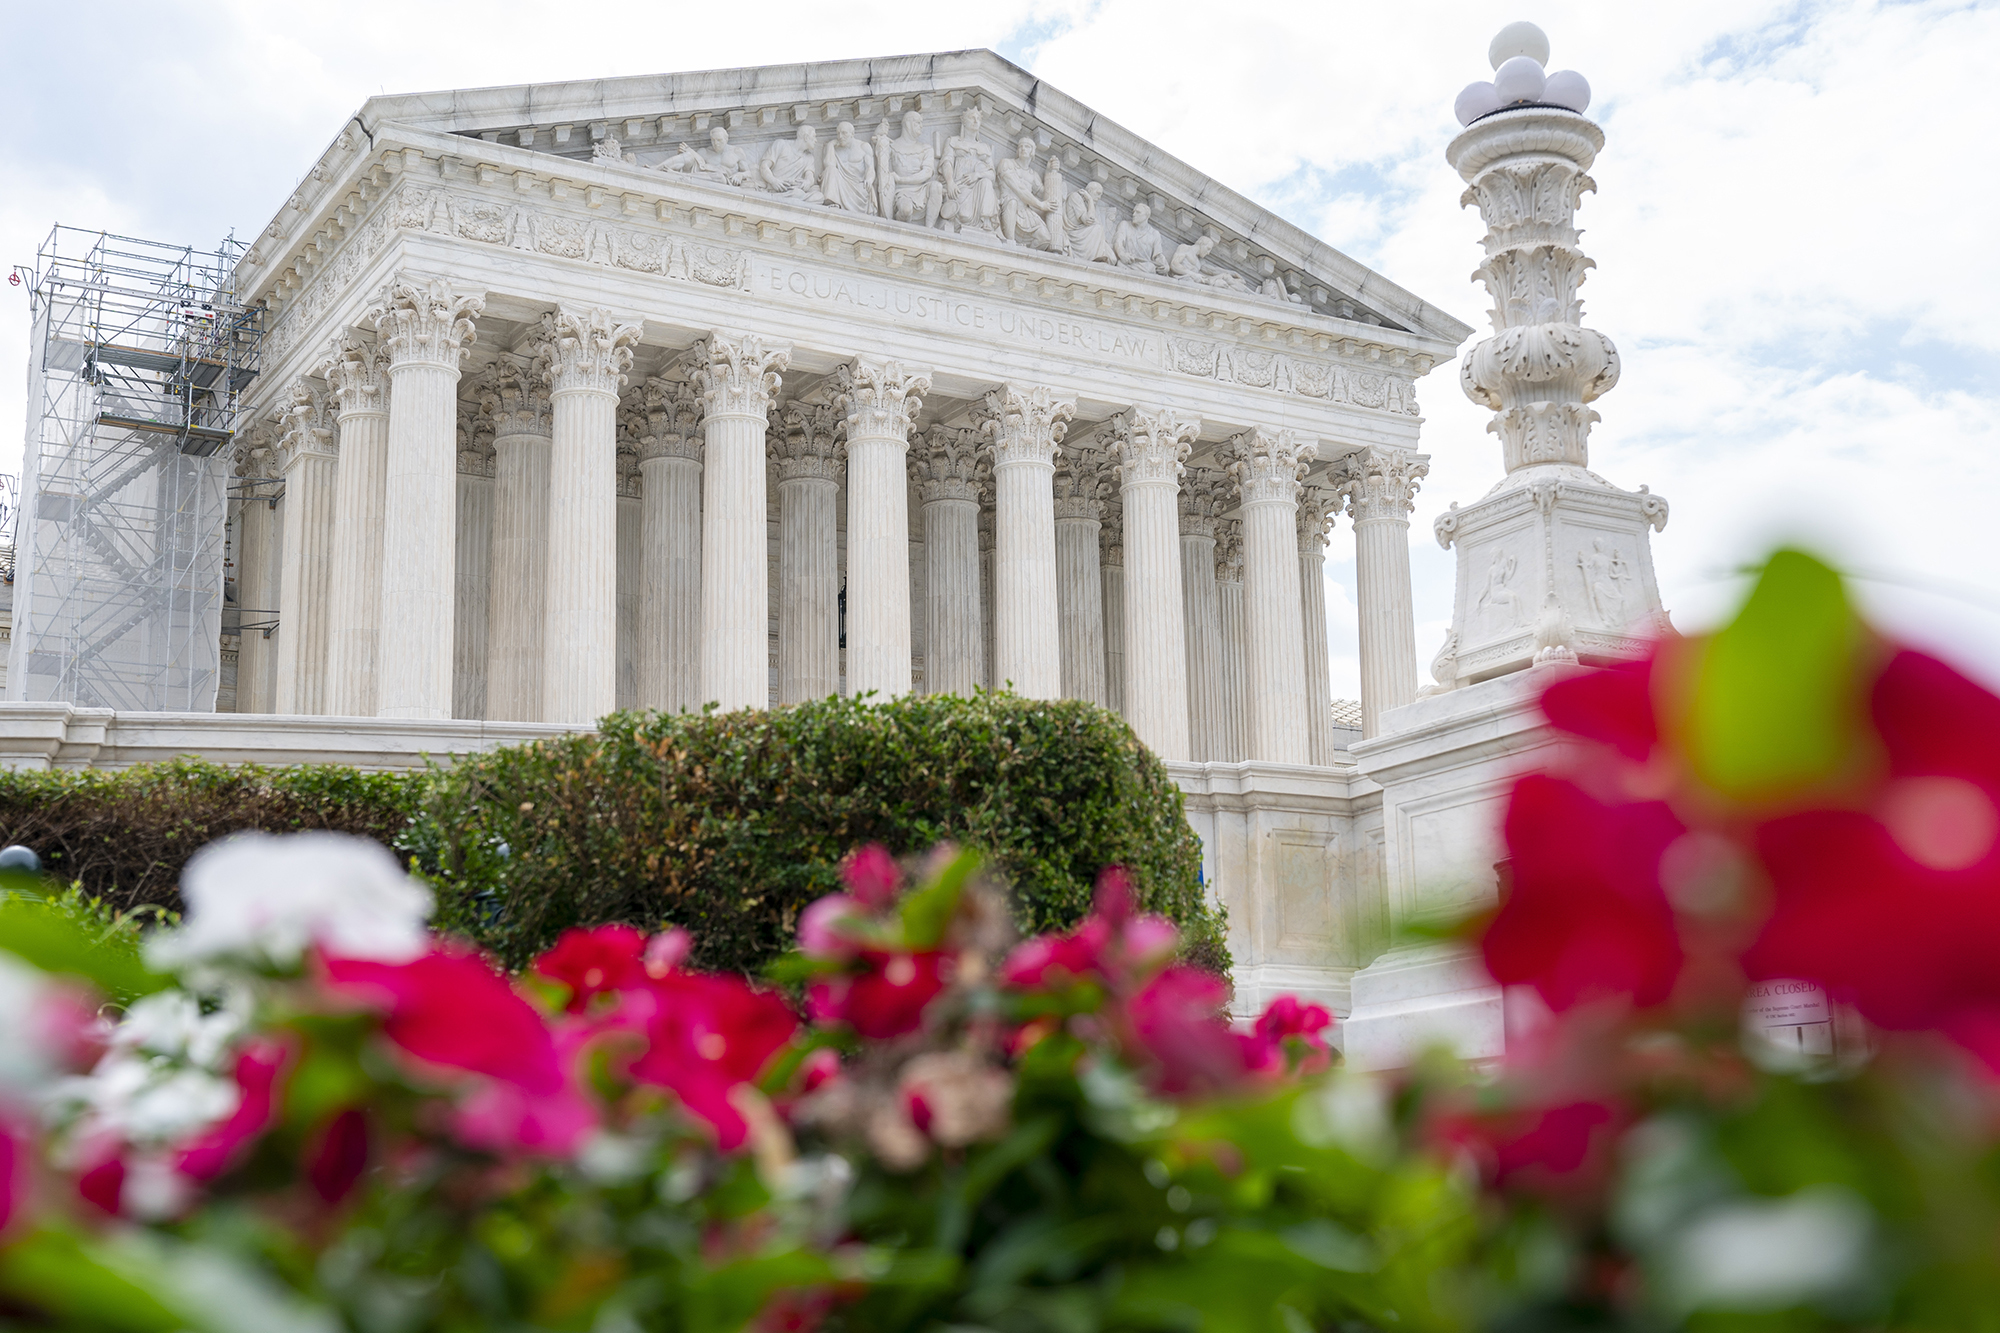 The United States Supreme Court is seen behind pink and white flowers.